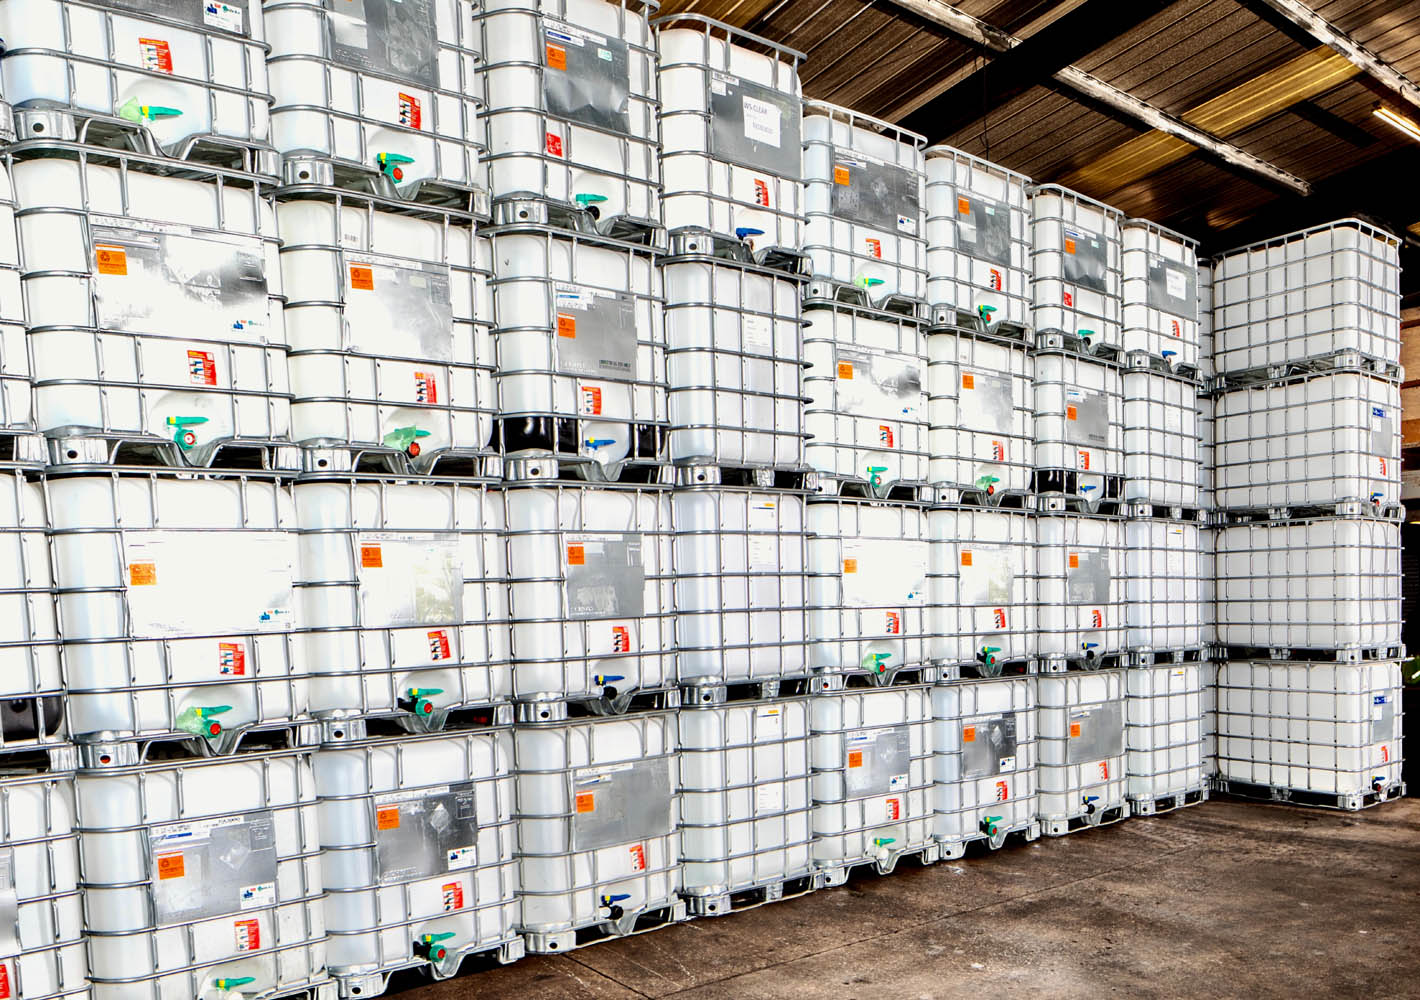 Rows of IBCs in the warehouse